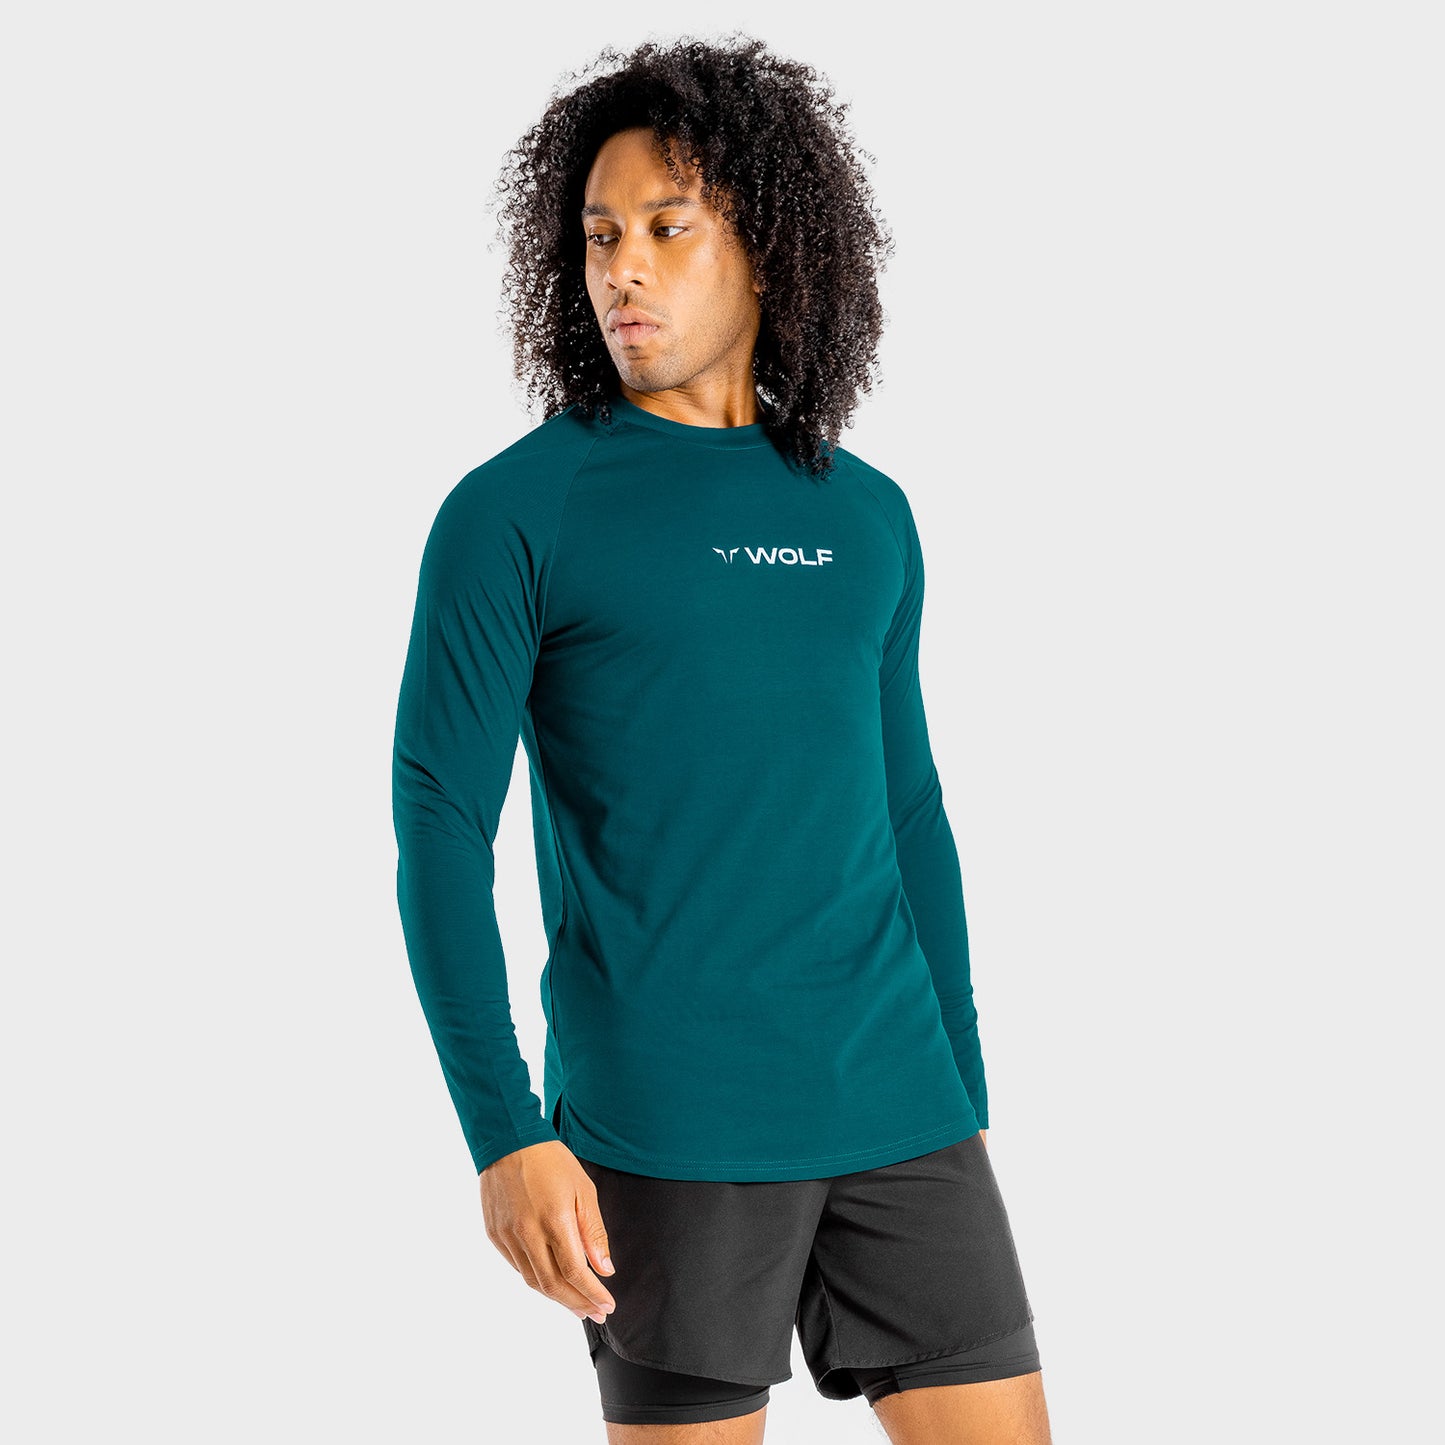 squatwolf-workout-shirts-for-men-primal-long-sleeve-tee-teal-gym-wear